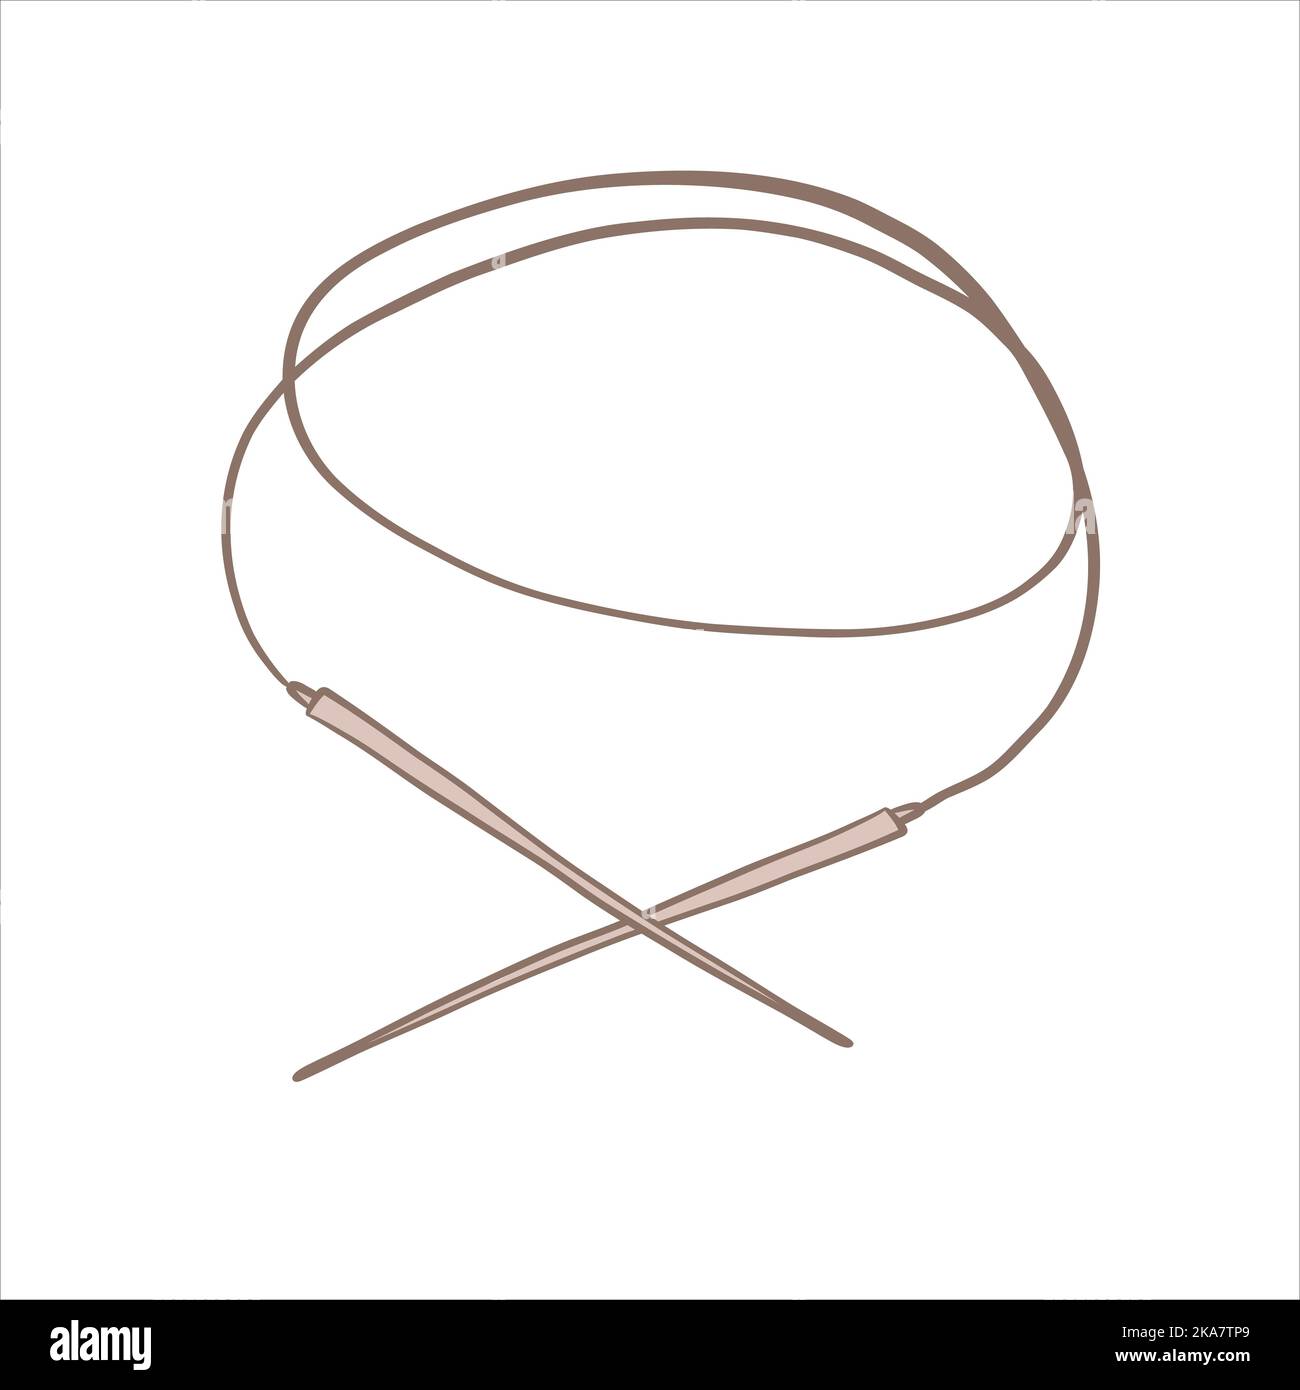 Vector illustration in doodle style. Knitting circular needles Stock Vector